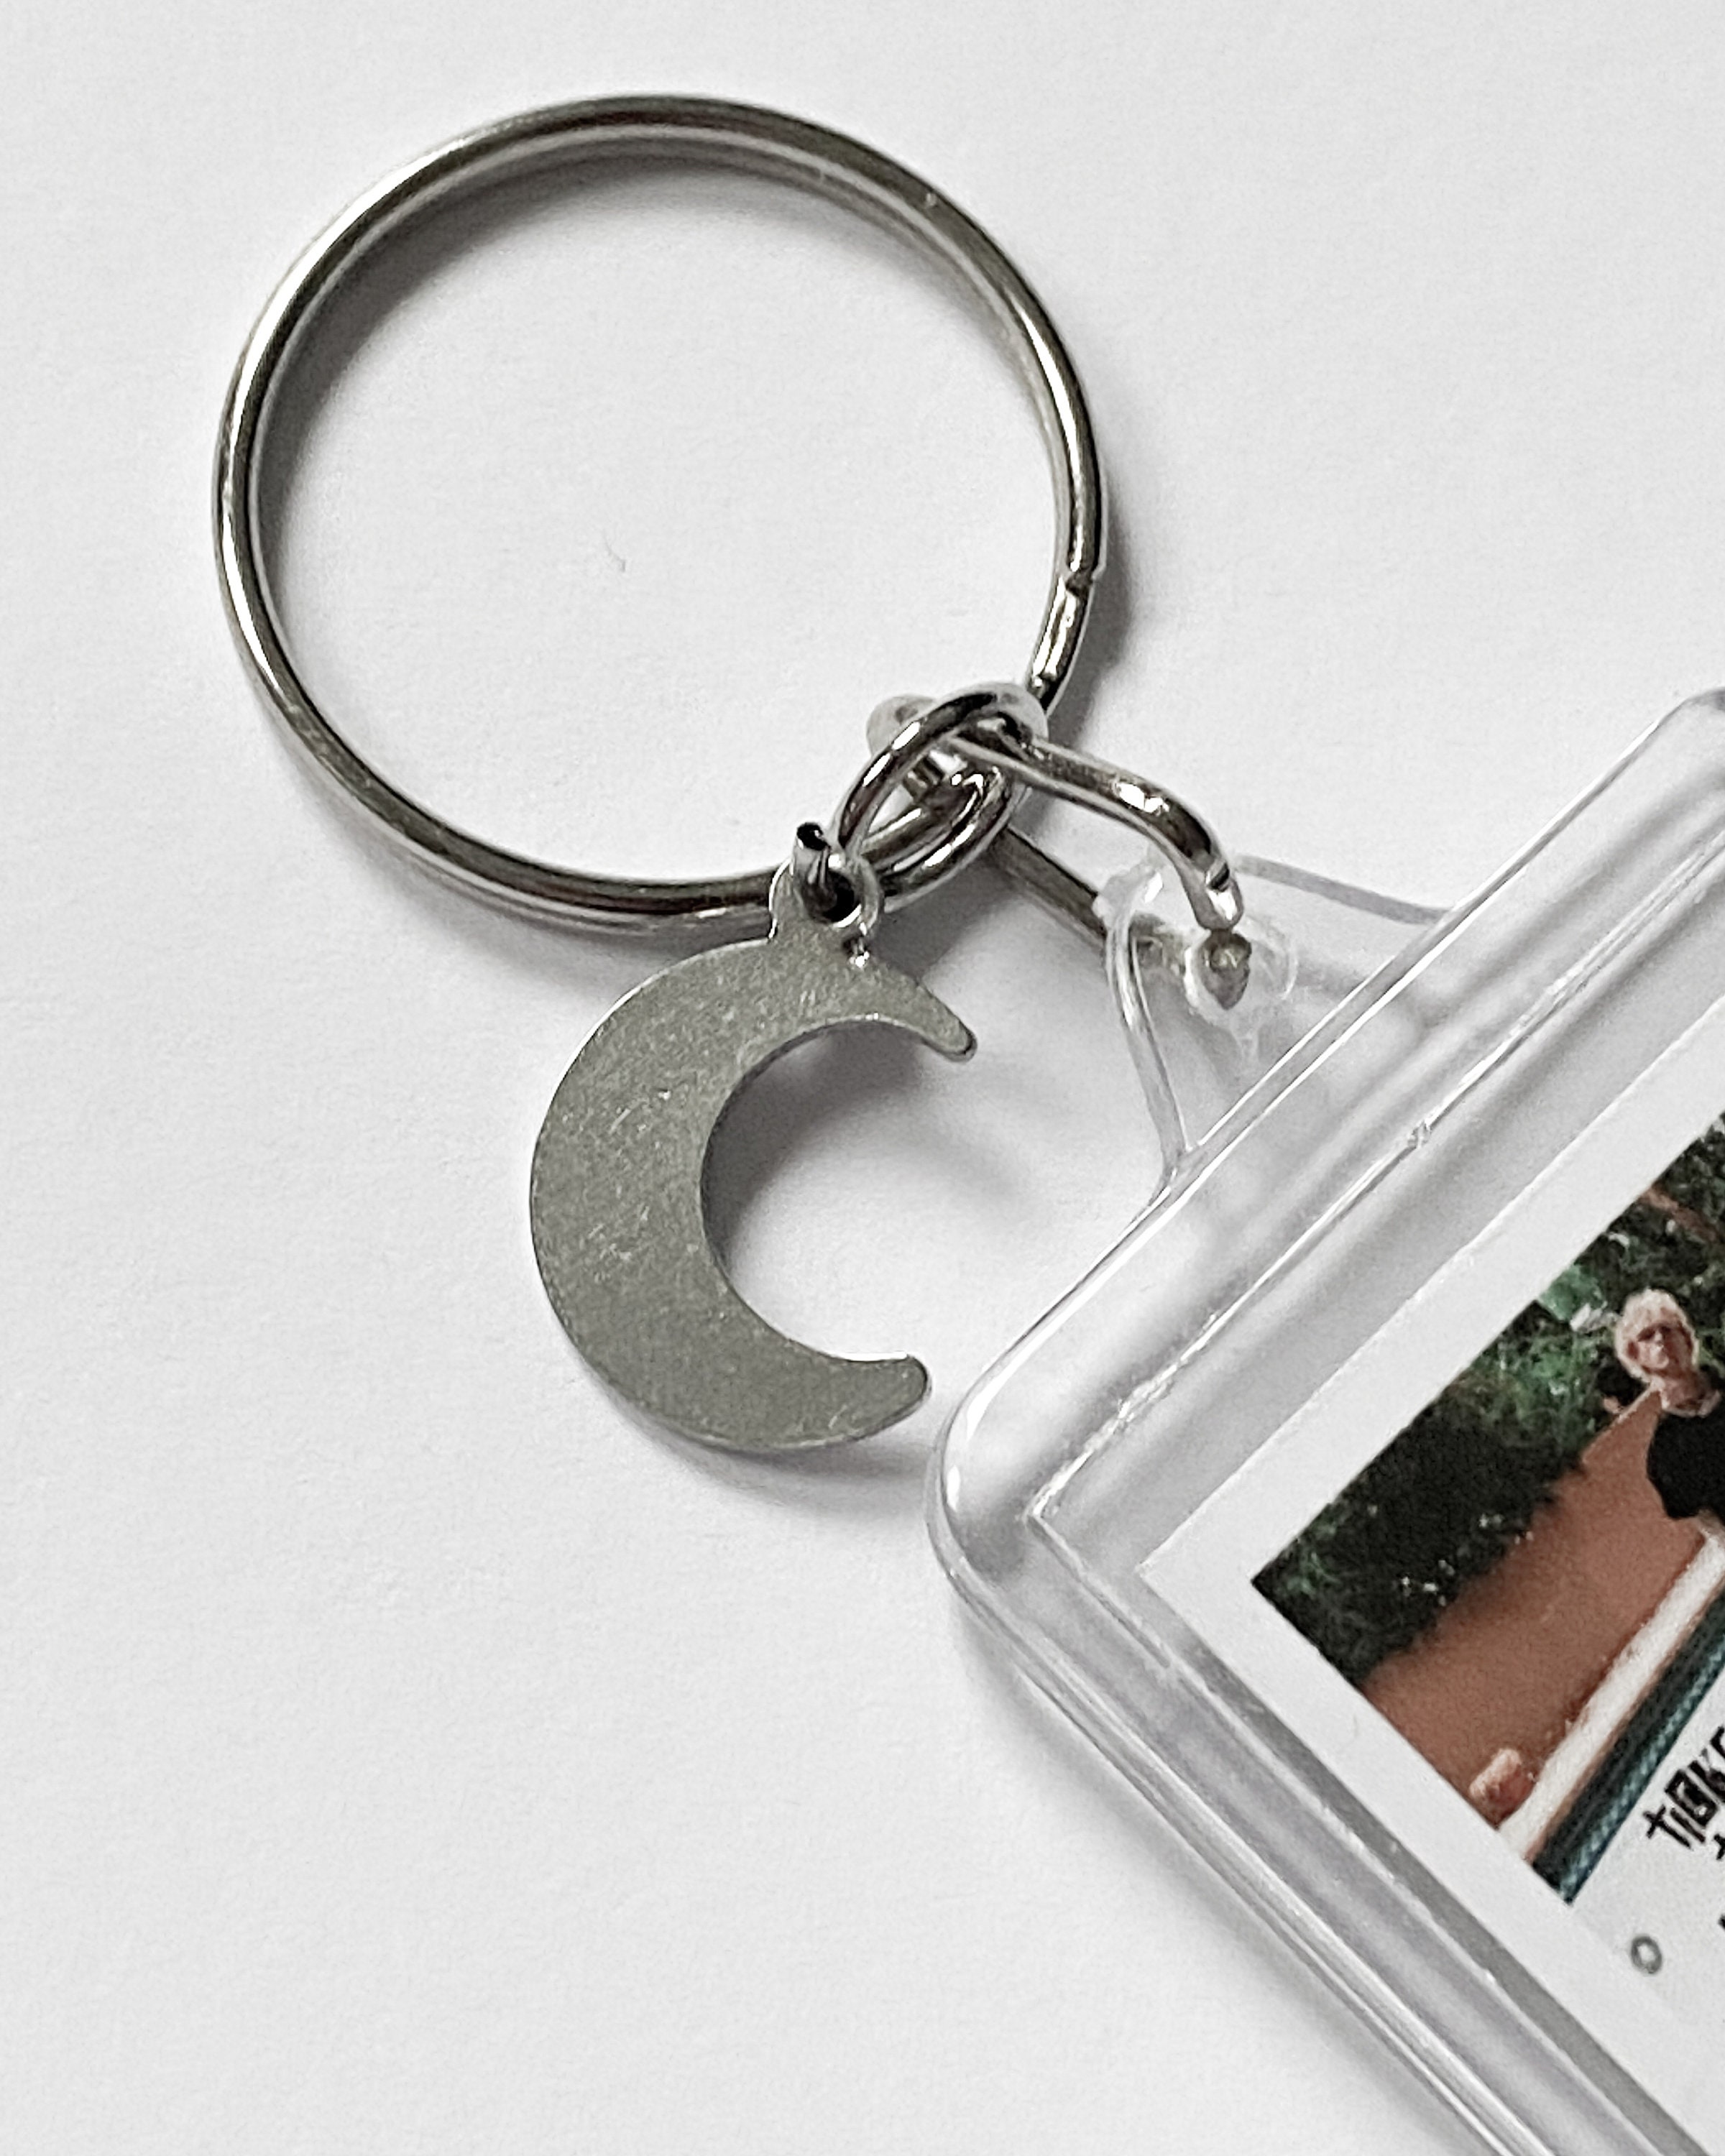 DikaGiftStudio Custom Keychain with Photo 2pcs - Double-Sided Personalized Keychain and Wooden Gift Box - Gift for Boyfriend - Gift for Him Photo Keyring